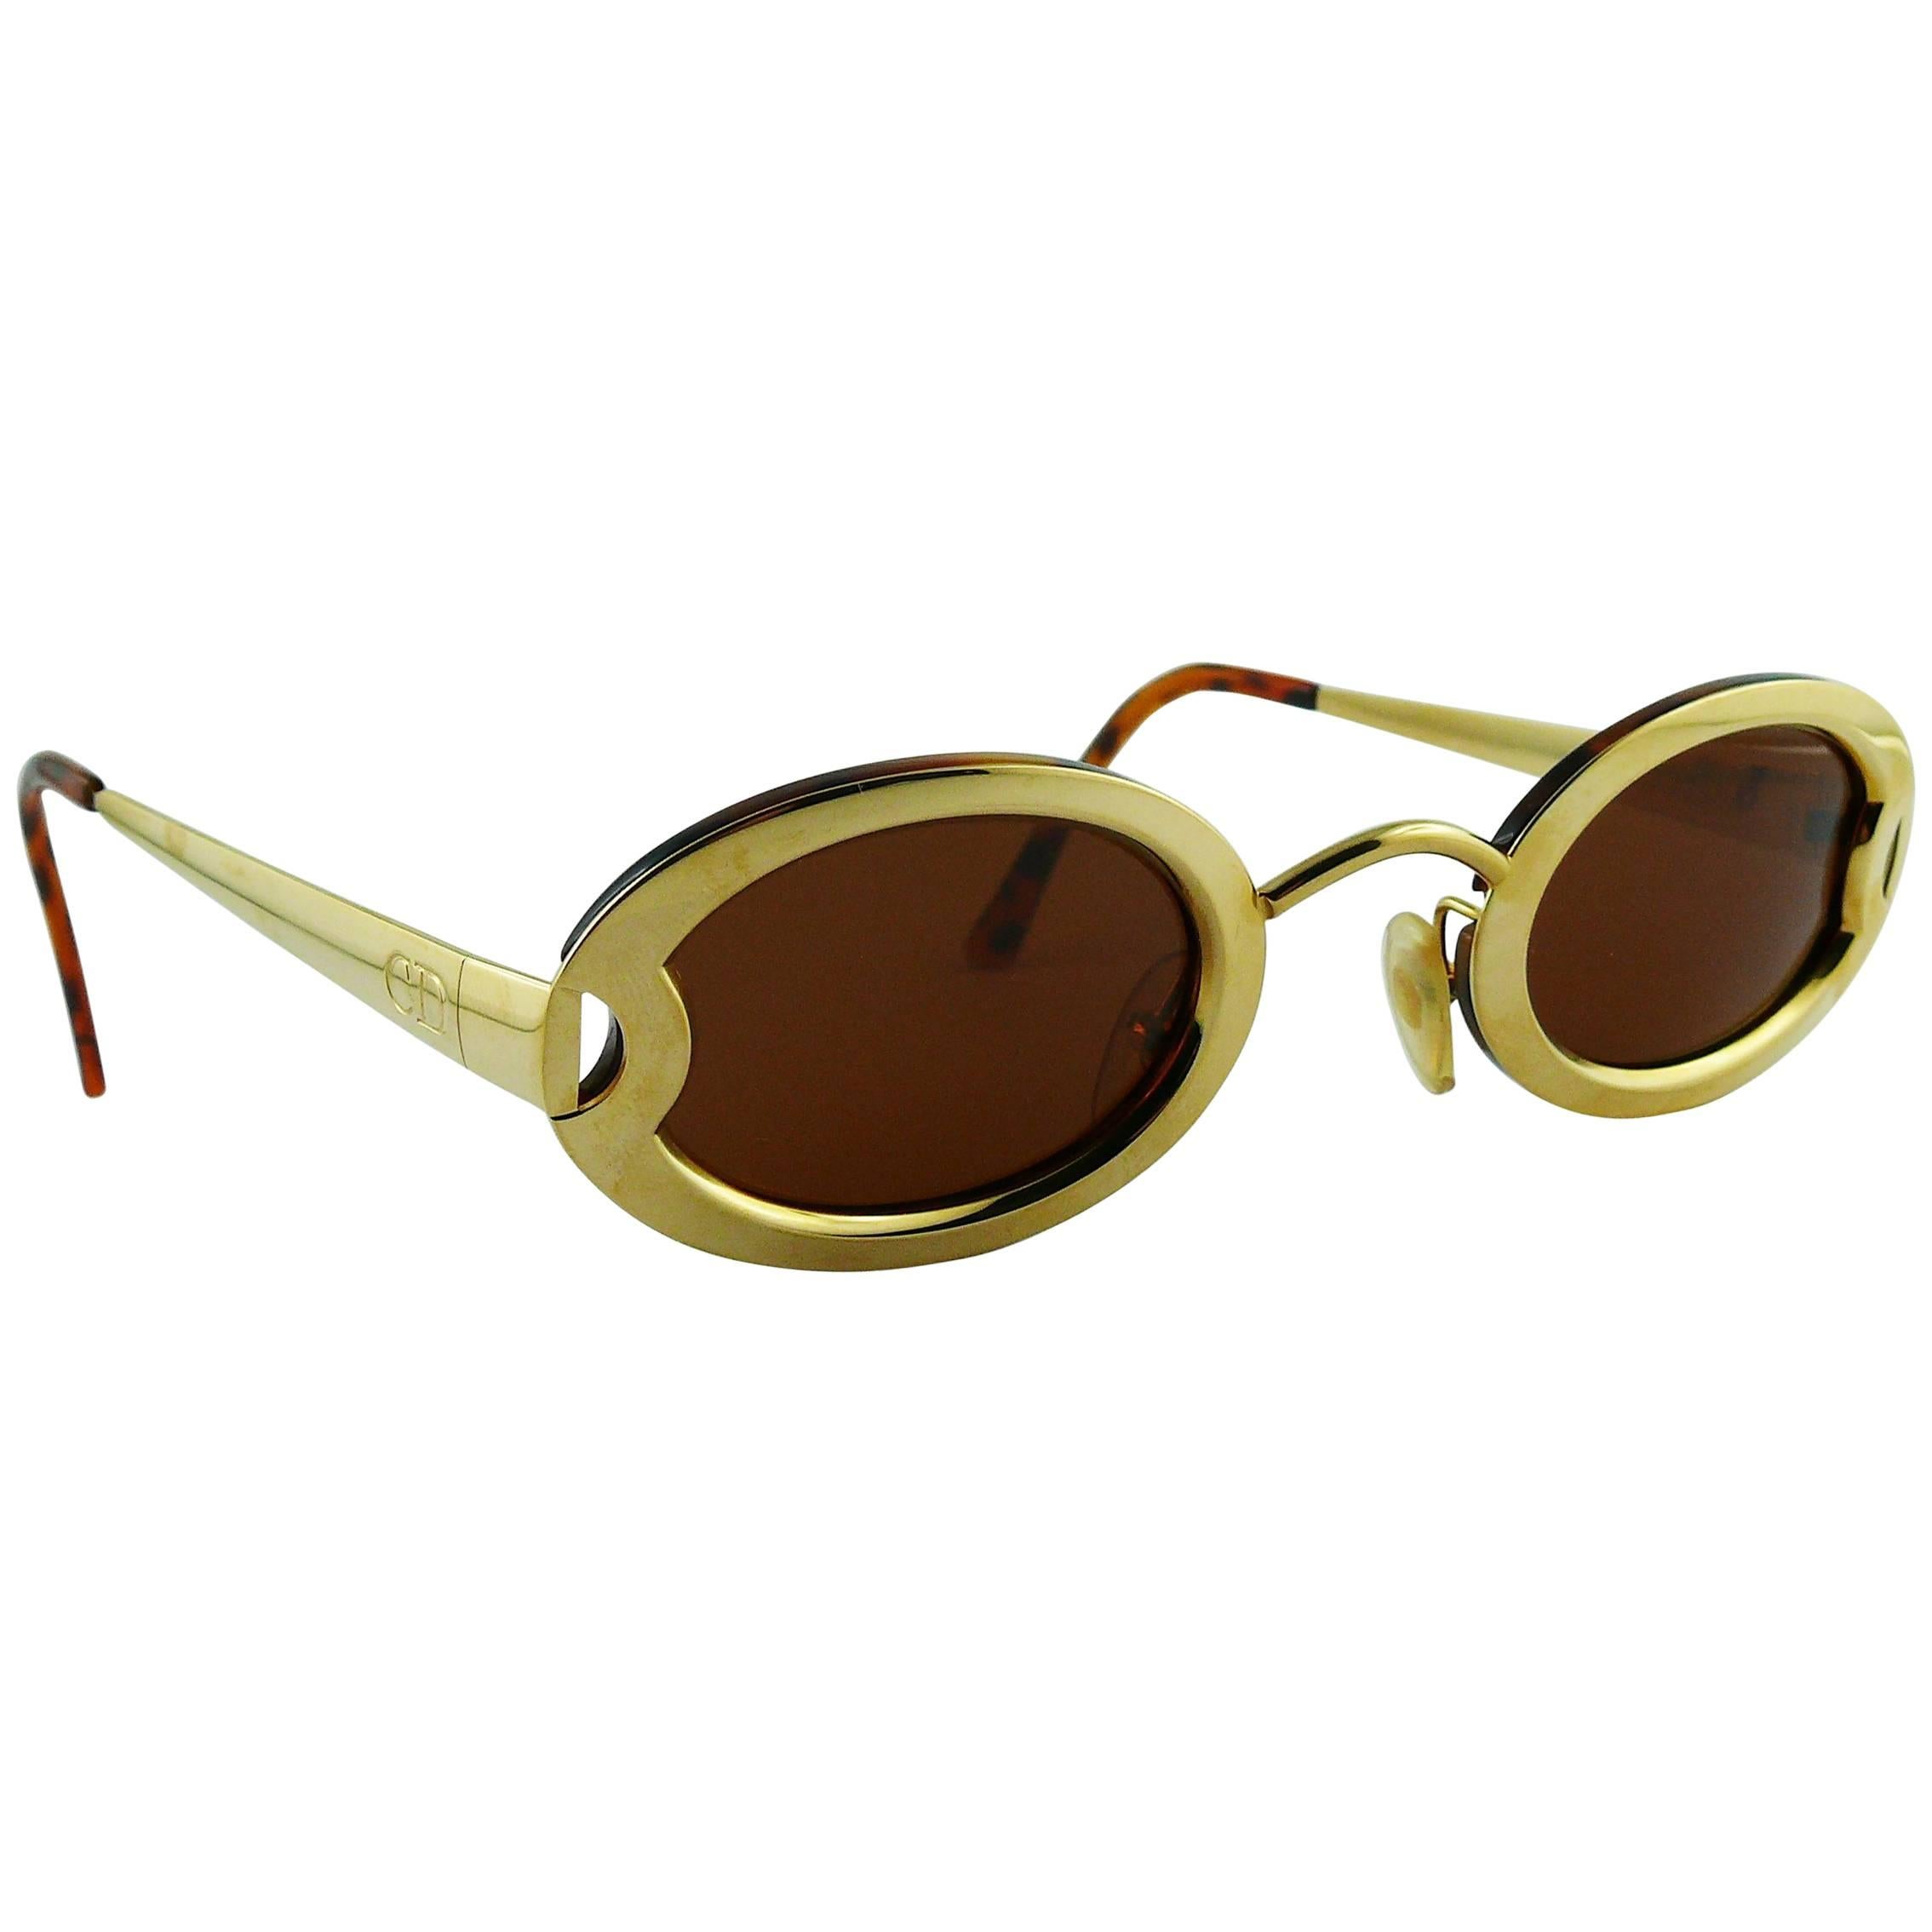 Christian Dior Vintage "Lunettes Show" Limited Edition Sunglasses, 1995 